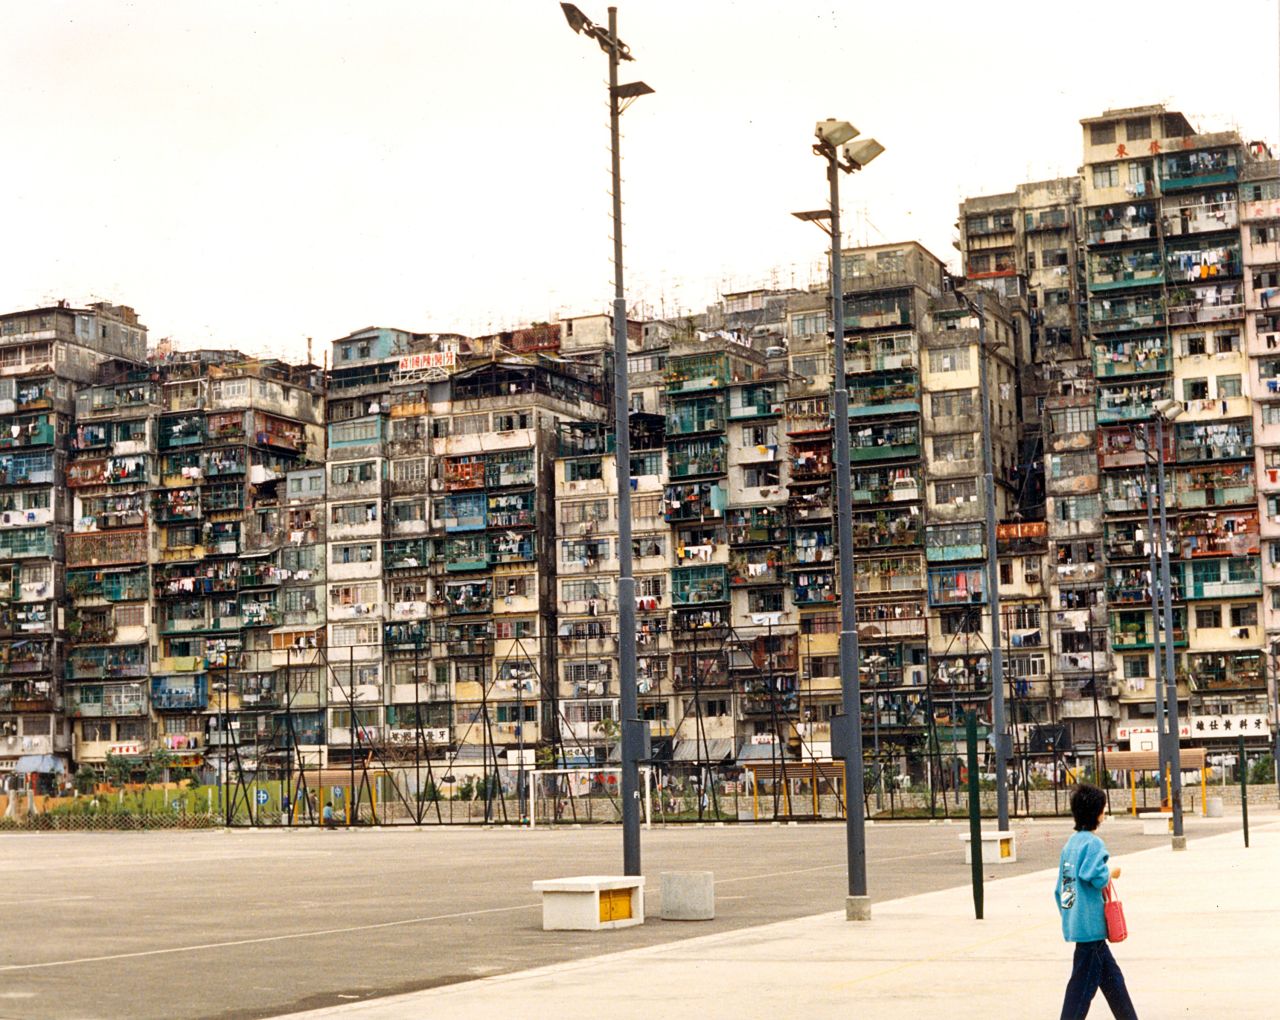 The Kowloon Walled City in Hong Kong is seen in this image taken in 1991. It was once the most densely populated place on Earth before it was demolished in 1994.